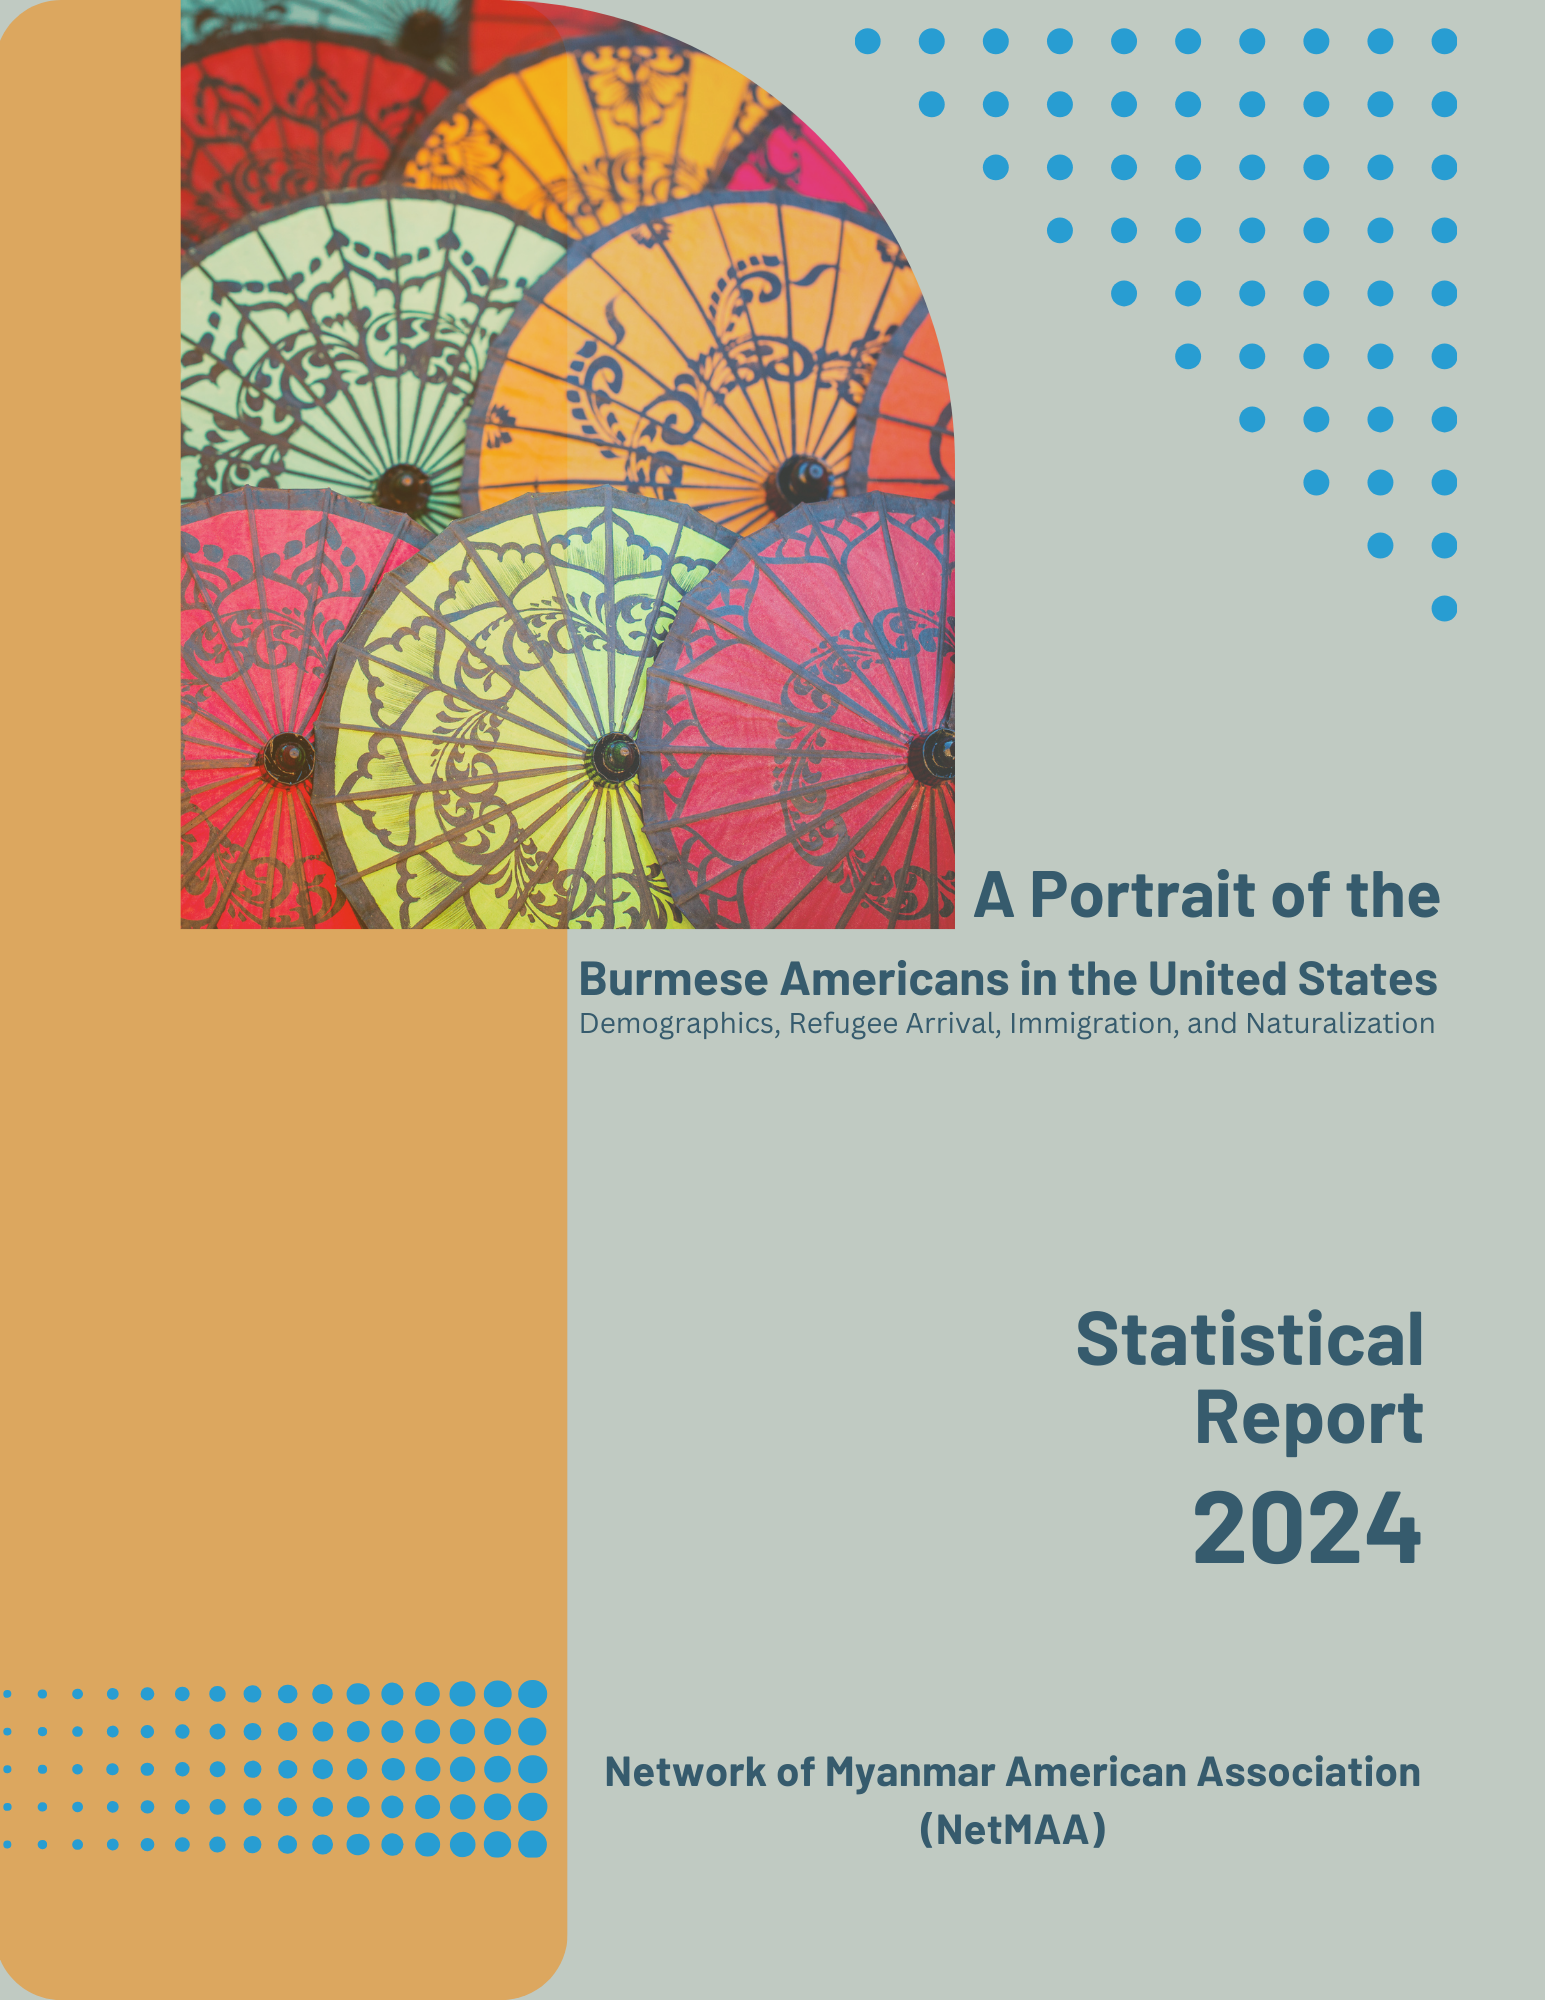 A Portrait of the Burmese Americans in the United States: 2024 Statistical Report